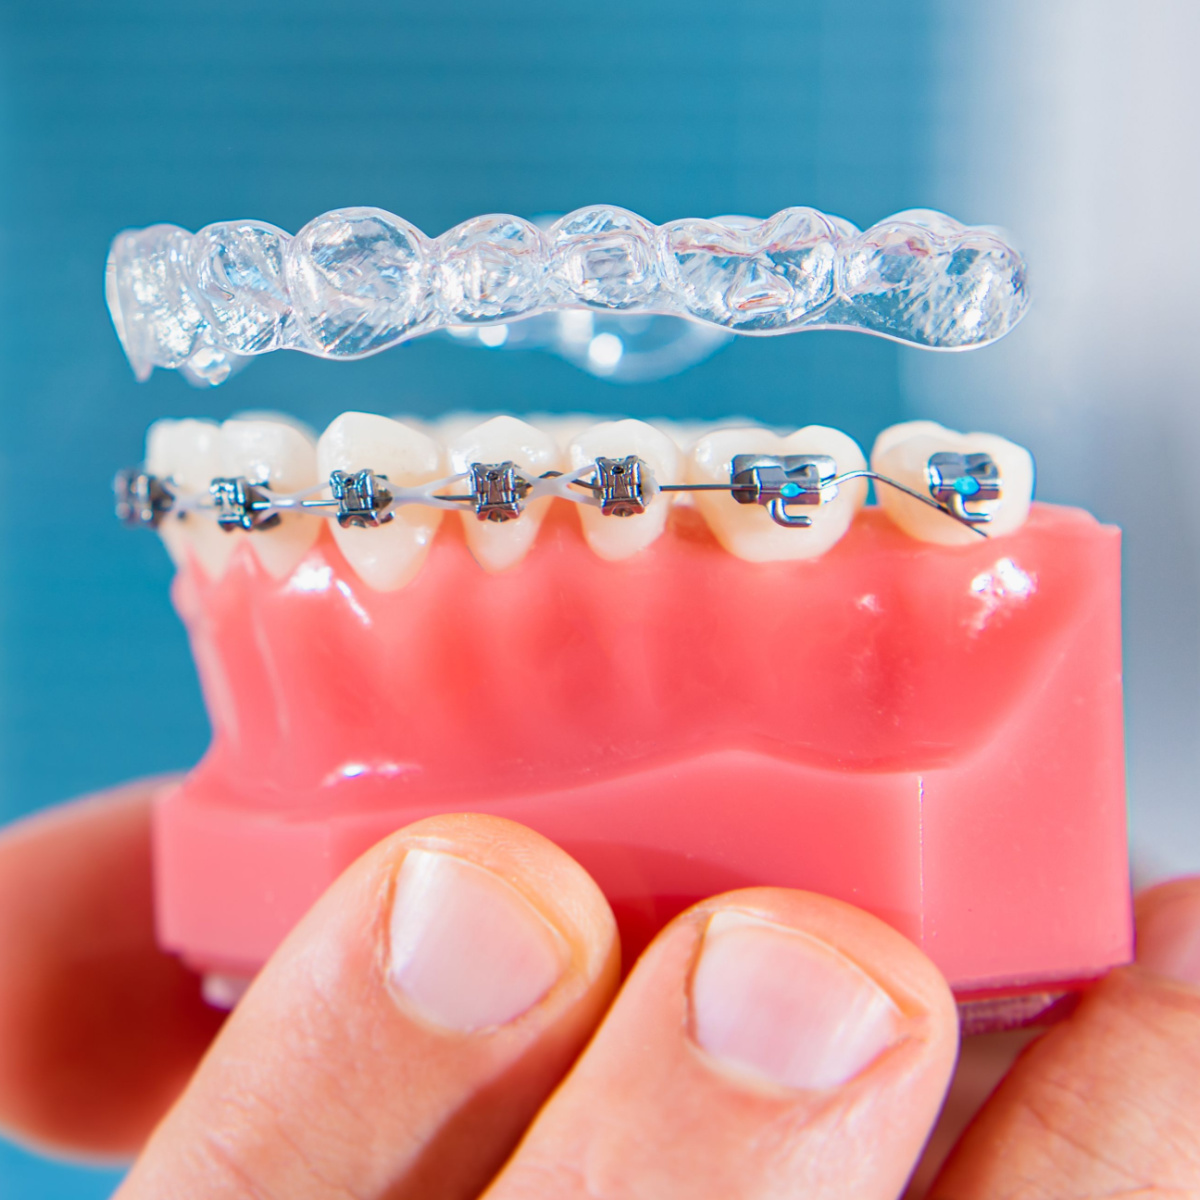 Two different types of Houston braces that you can get from your Houston dentist. Find out the difference between metal braces, ceramic braces, and Invisalign.